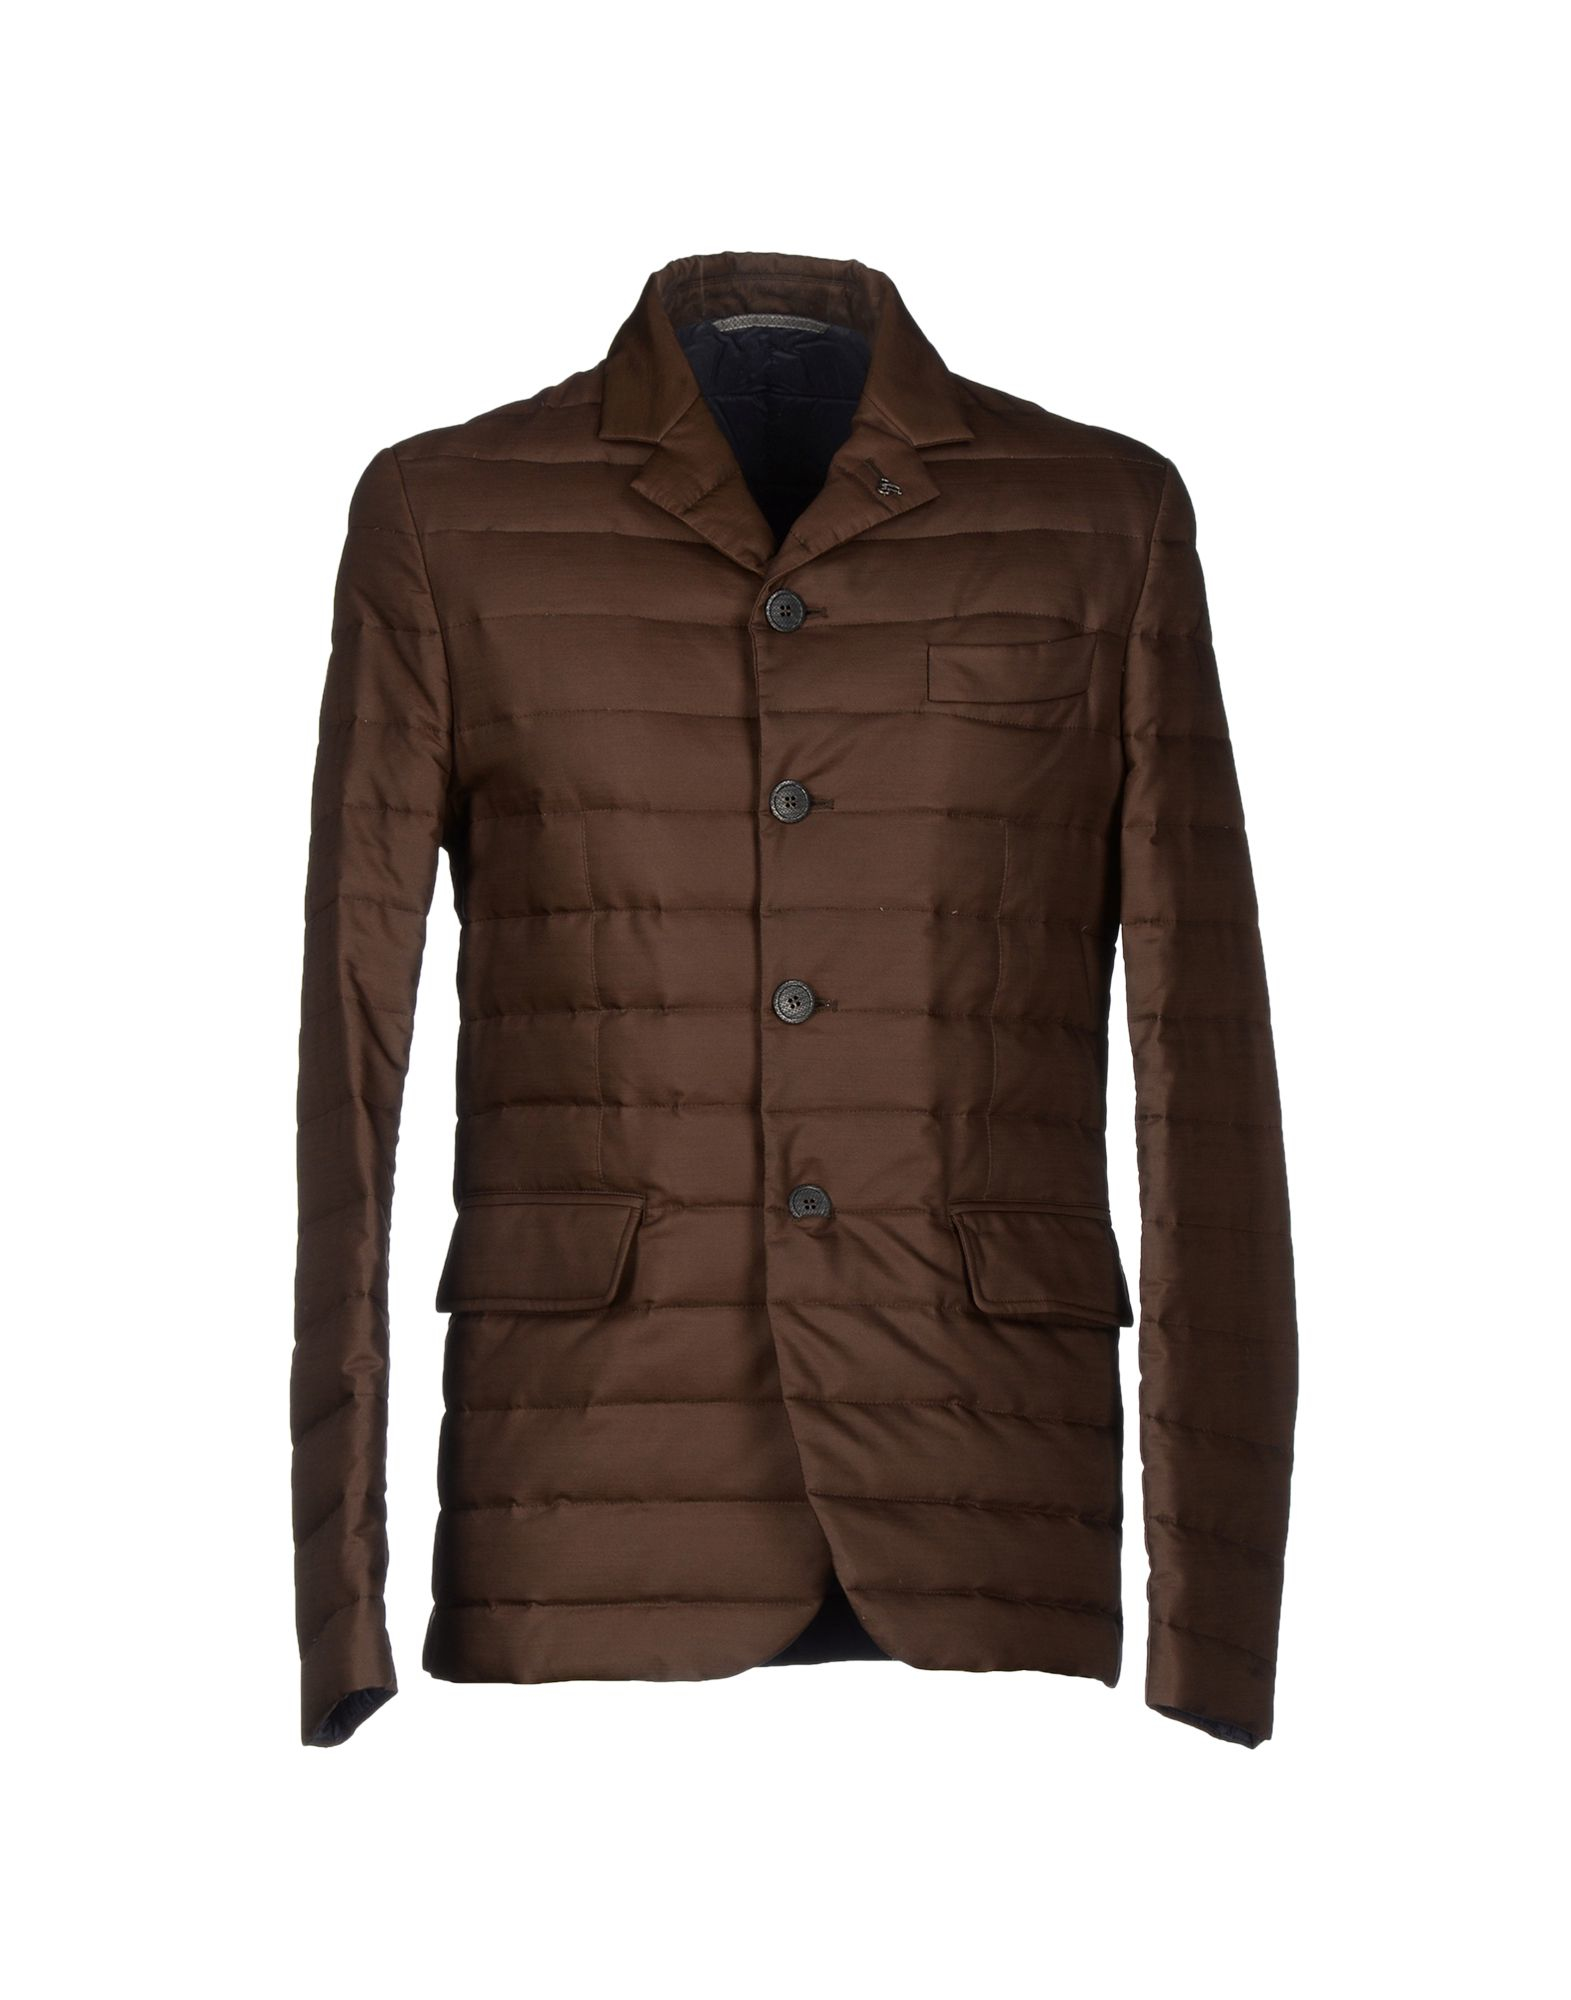 Lyst - Canali Down Jacket in Brown for Men